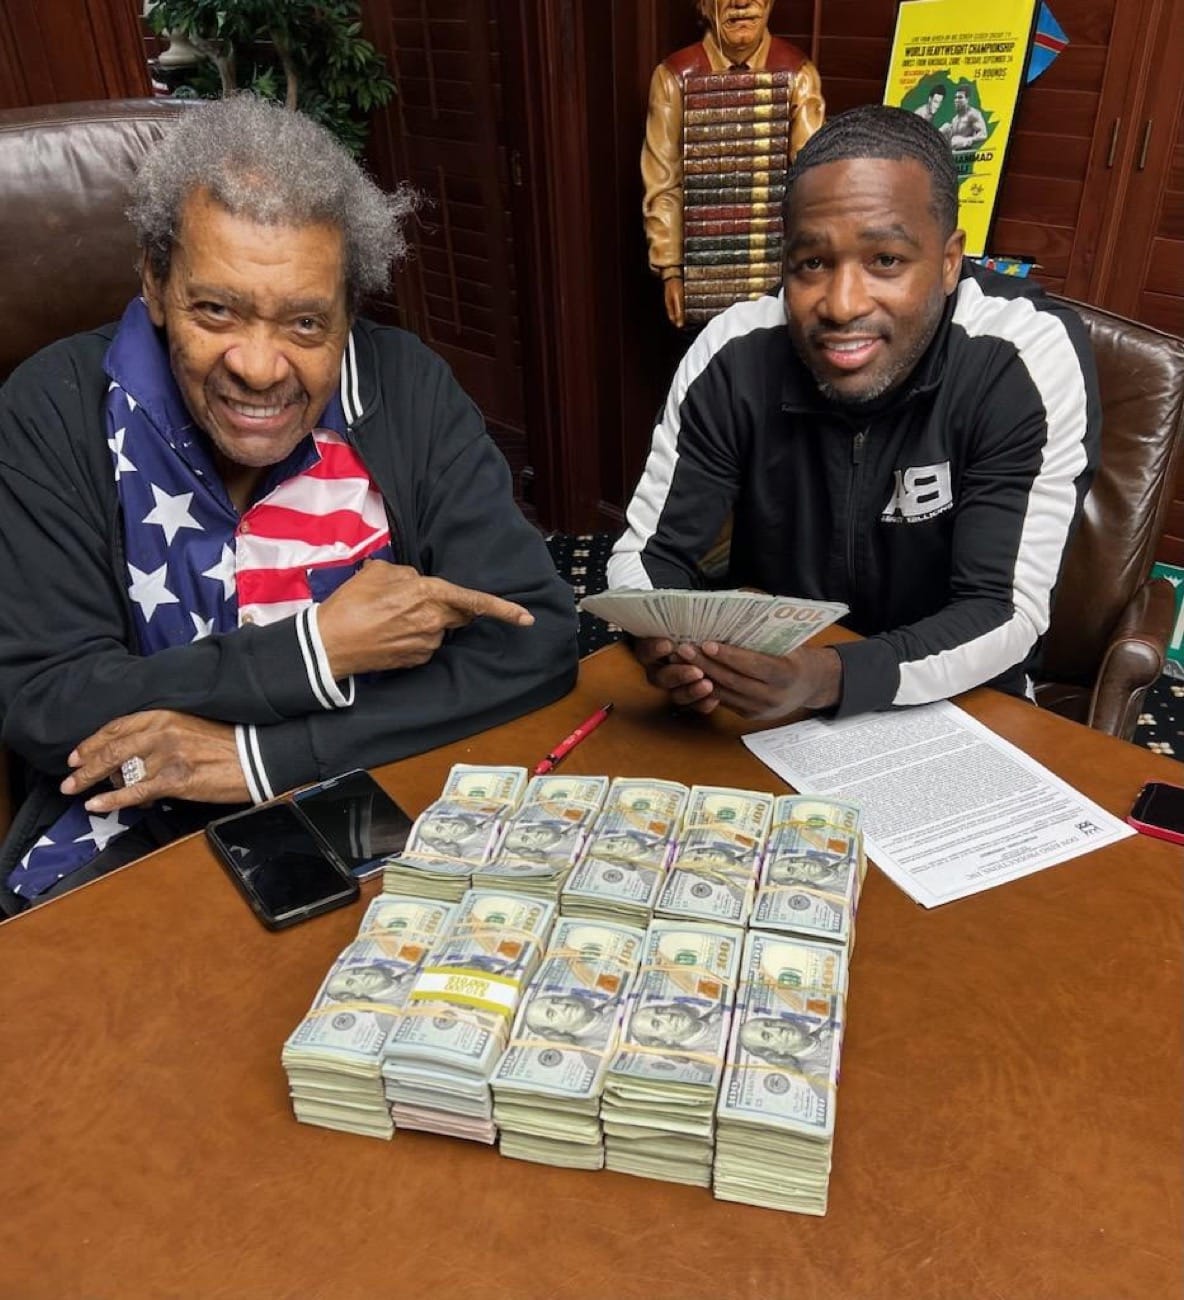 Image: Don King and Adrien Broner should focus on Blair "The Flair" Cobbs